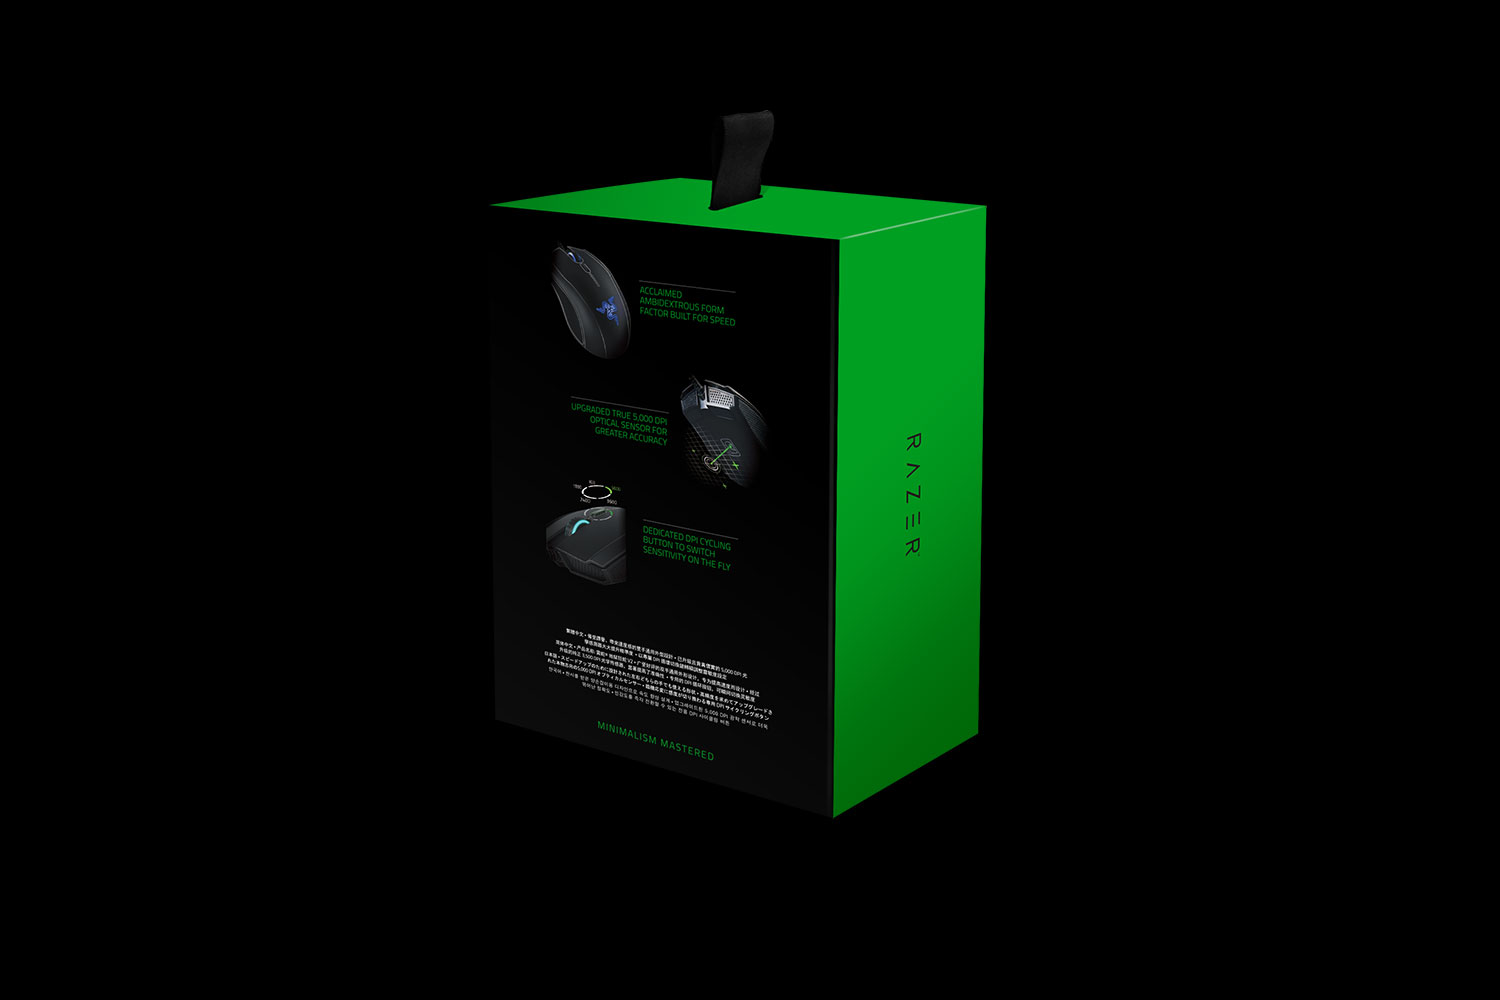 Razer Abyssus V2 5.000 DPI Ambidextrous Gaming Mouse Beidhändig